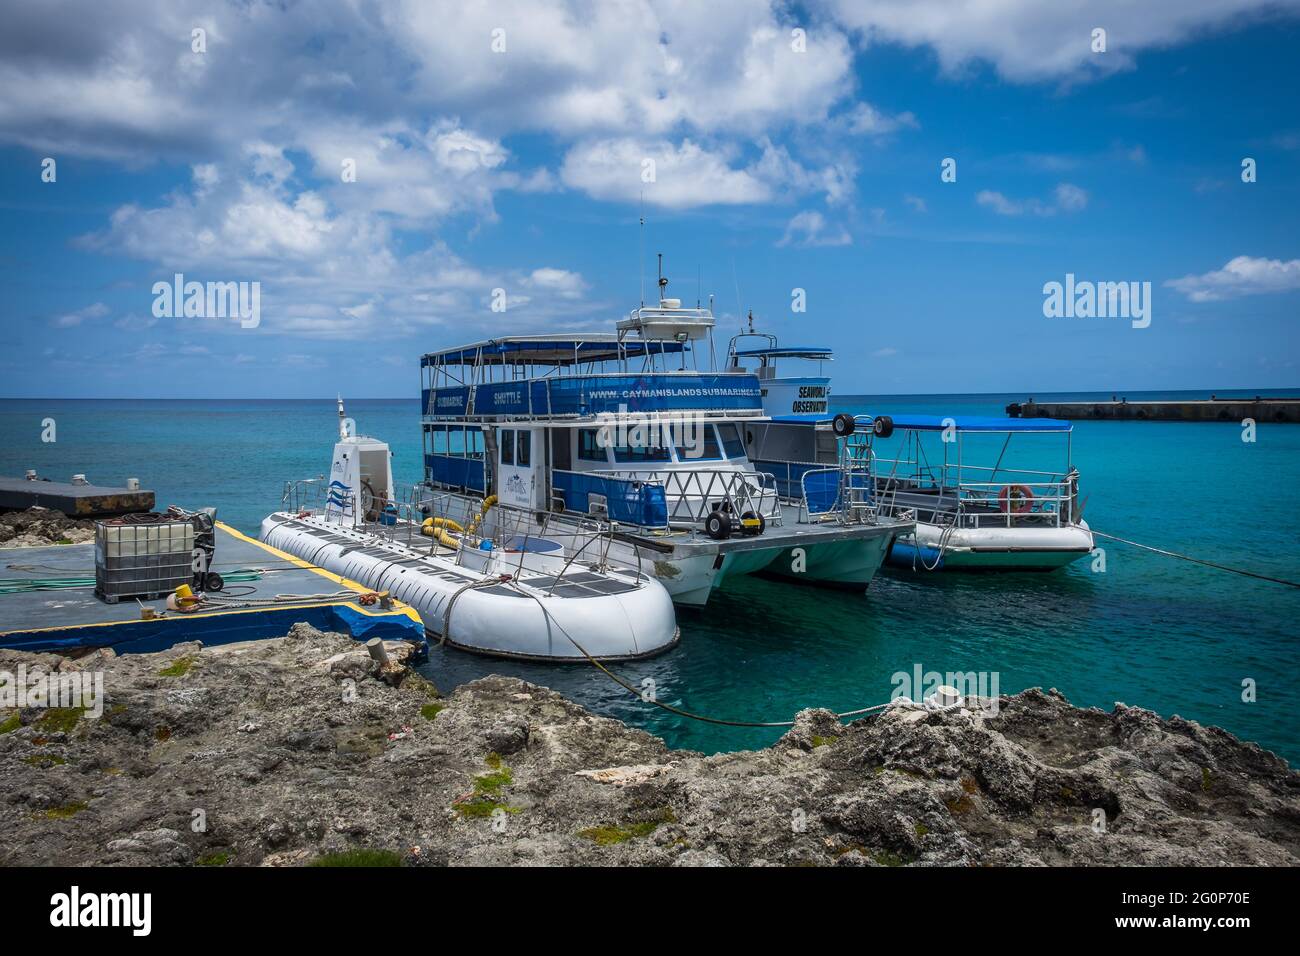 Grand Cayman, Cayman Islands, July 2020, view of the Atlantis Fleet in George Town a tour company organizing submarine excursion in the Caribbean Sea Stock Photo